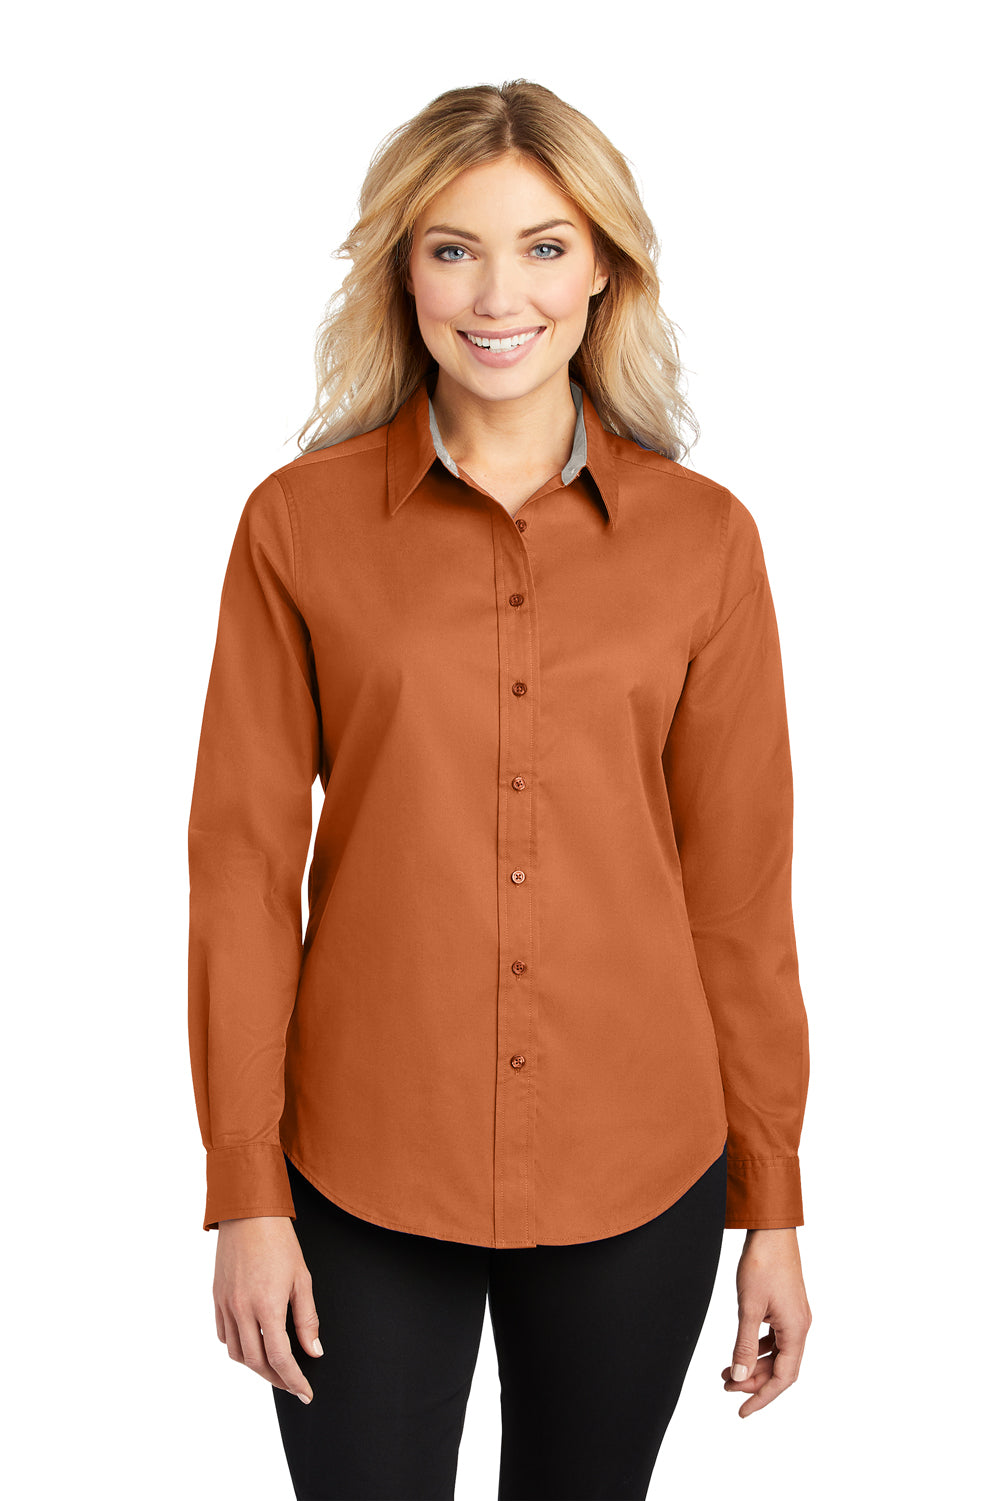 Port Authority L608 Womens Easy Care Wrinkle Resistant Long Sleeve Button Down Shirt Texas Orange Front